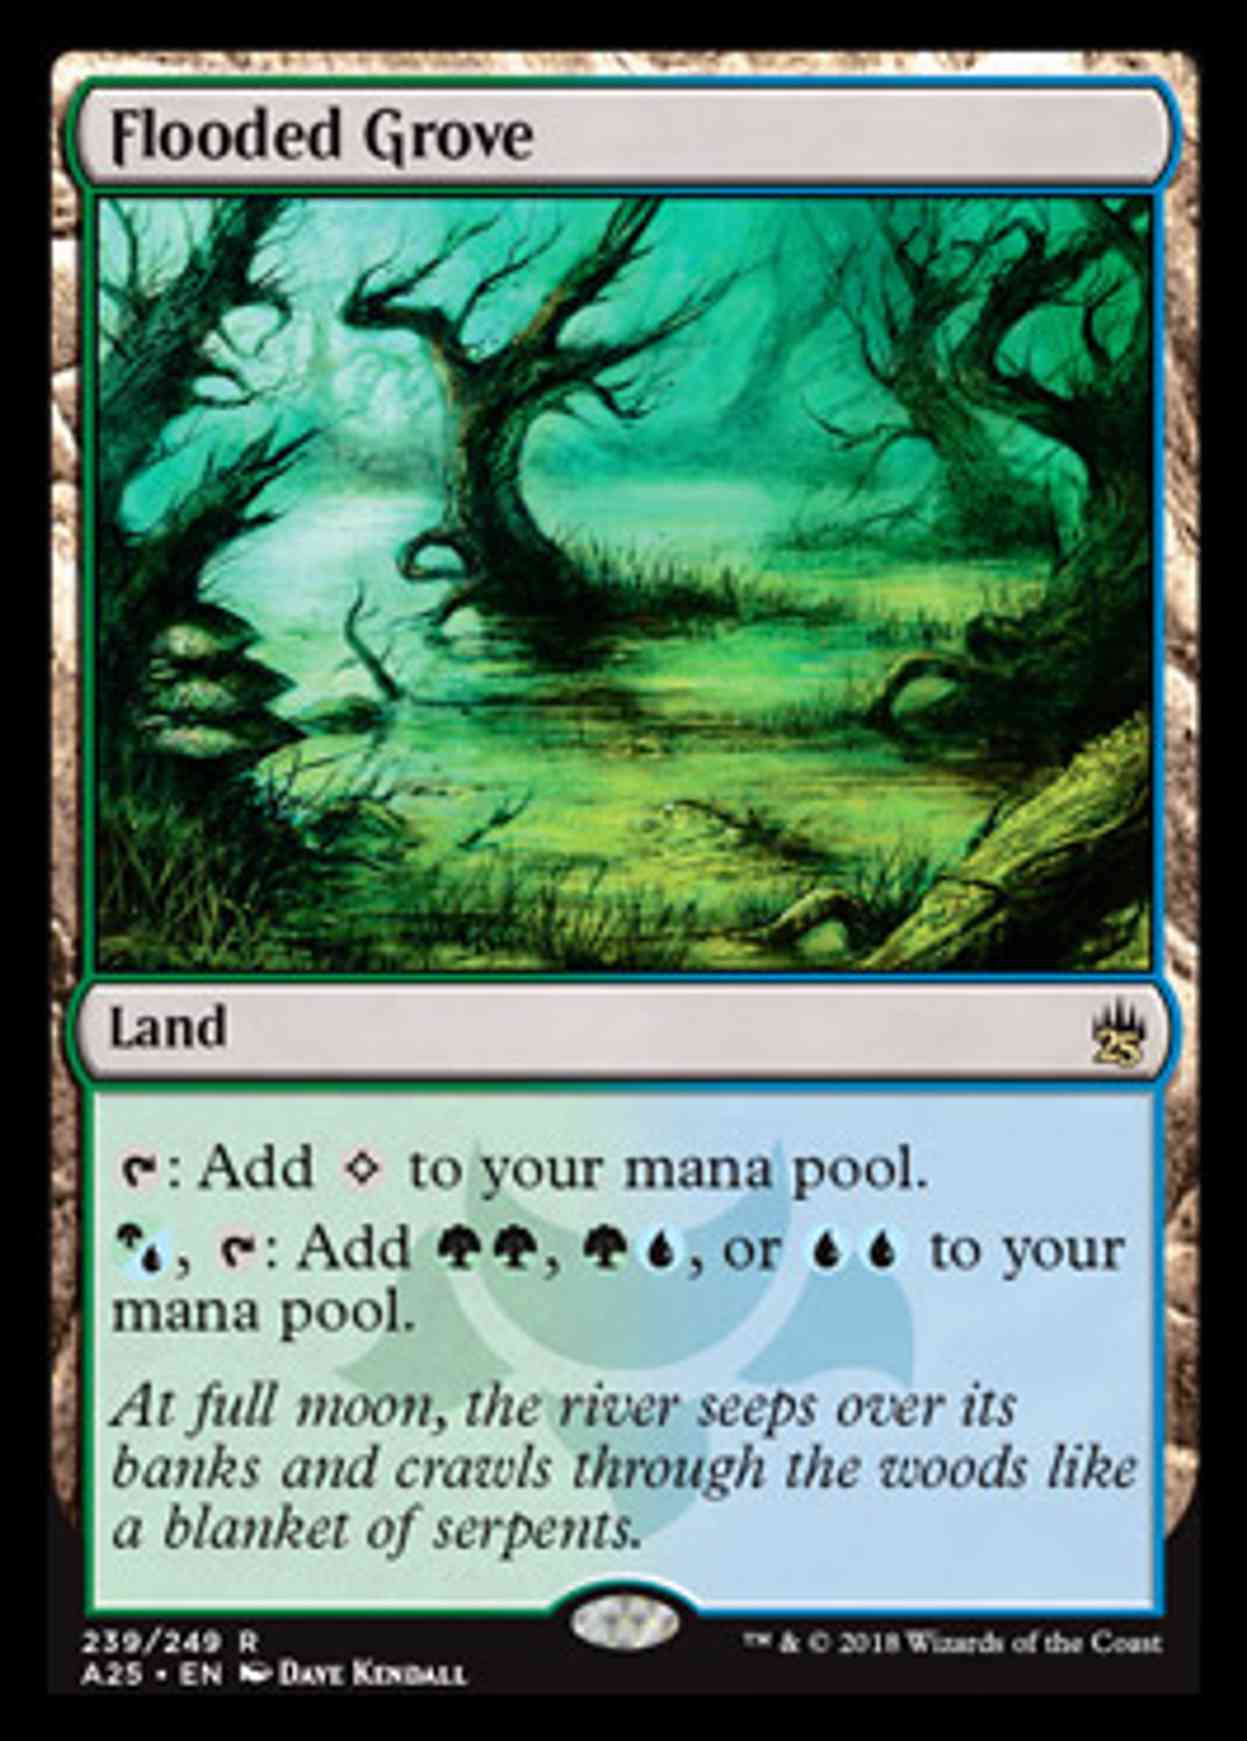 Flooded Grove magic card front